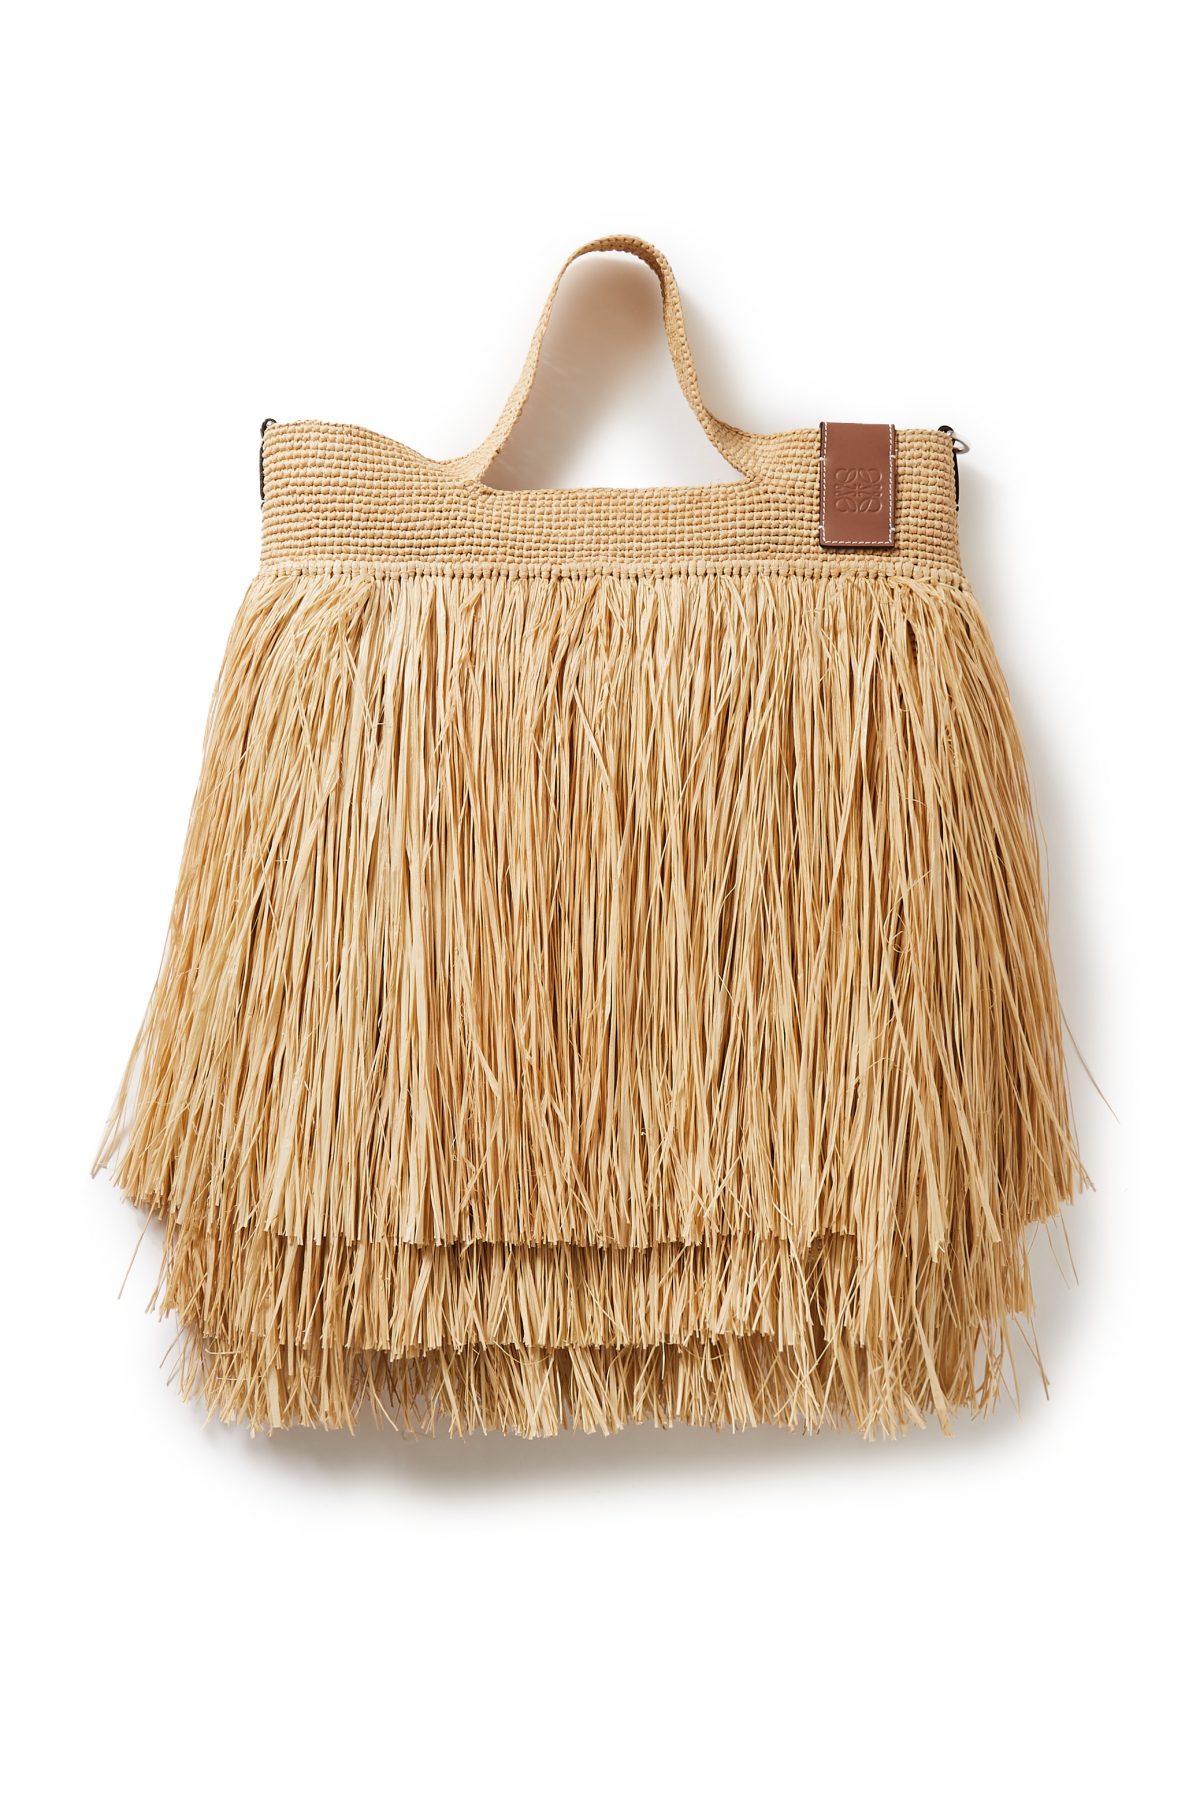 Dadou~Chic: Loewe's Leather-Trimmed Woven Raffia Tote White